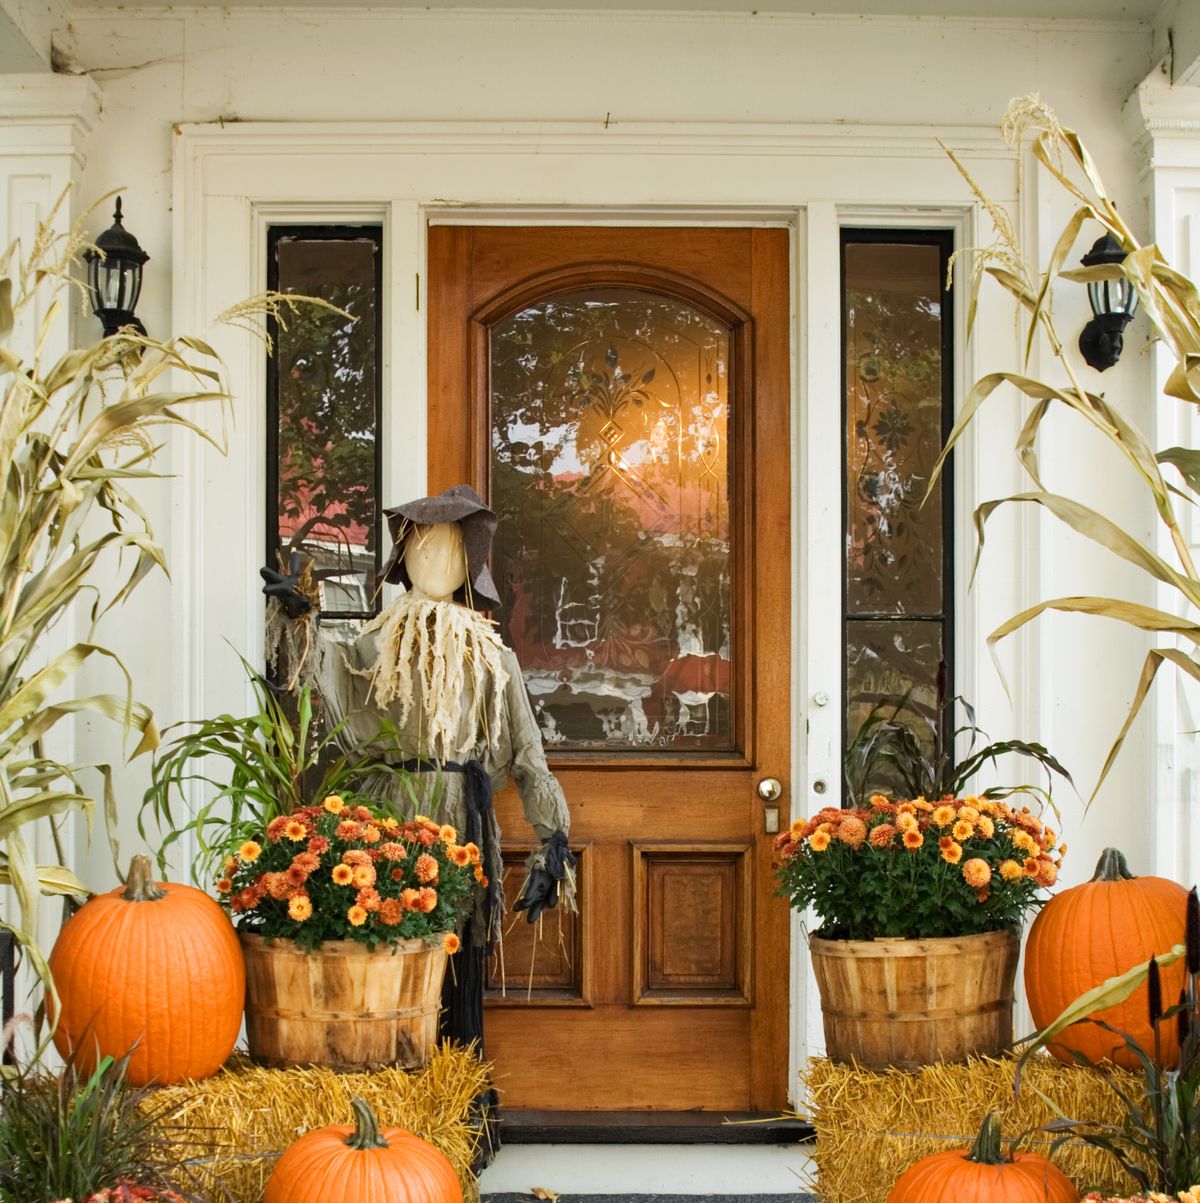 Dress Up Your Porch with These Fall-Friendly Ideas